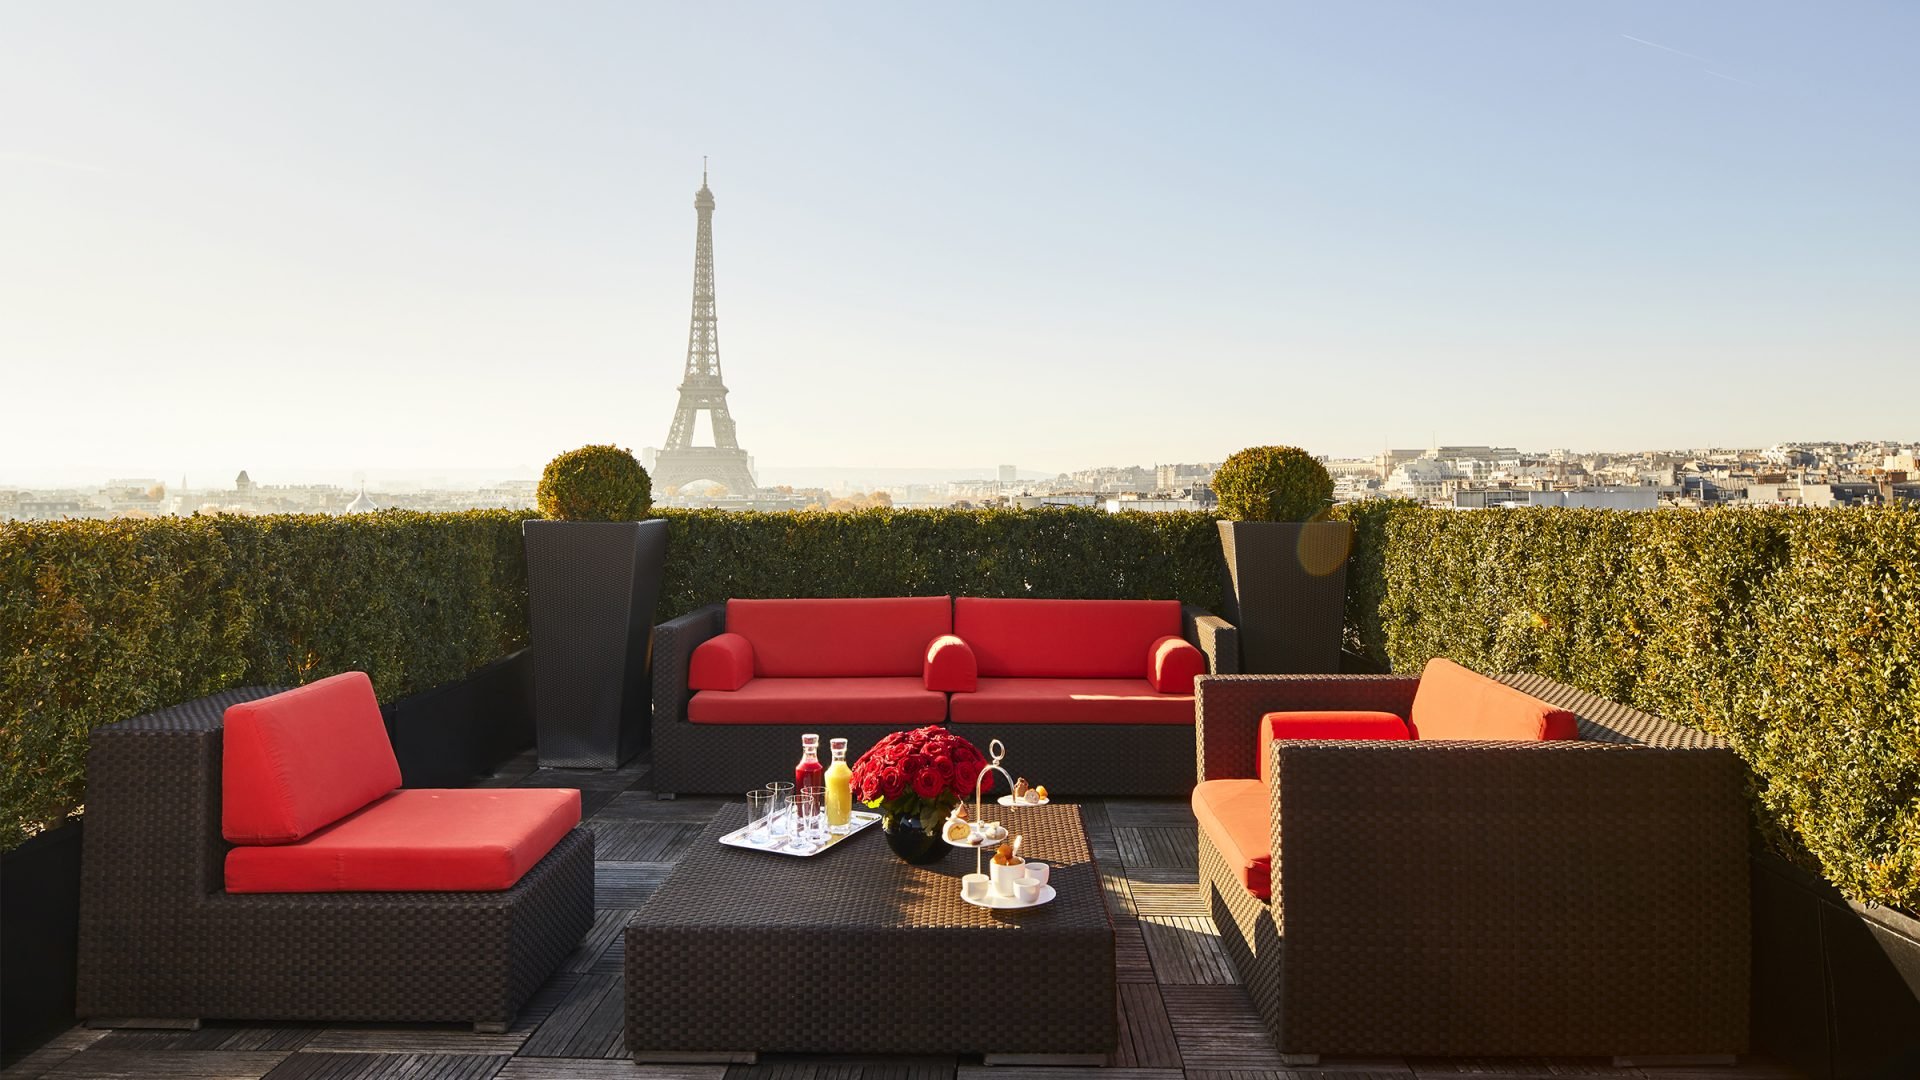 Private dining area at the rooftop with Eiffel Tower background at Hotel Plaza Athenee Paris